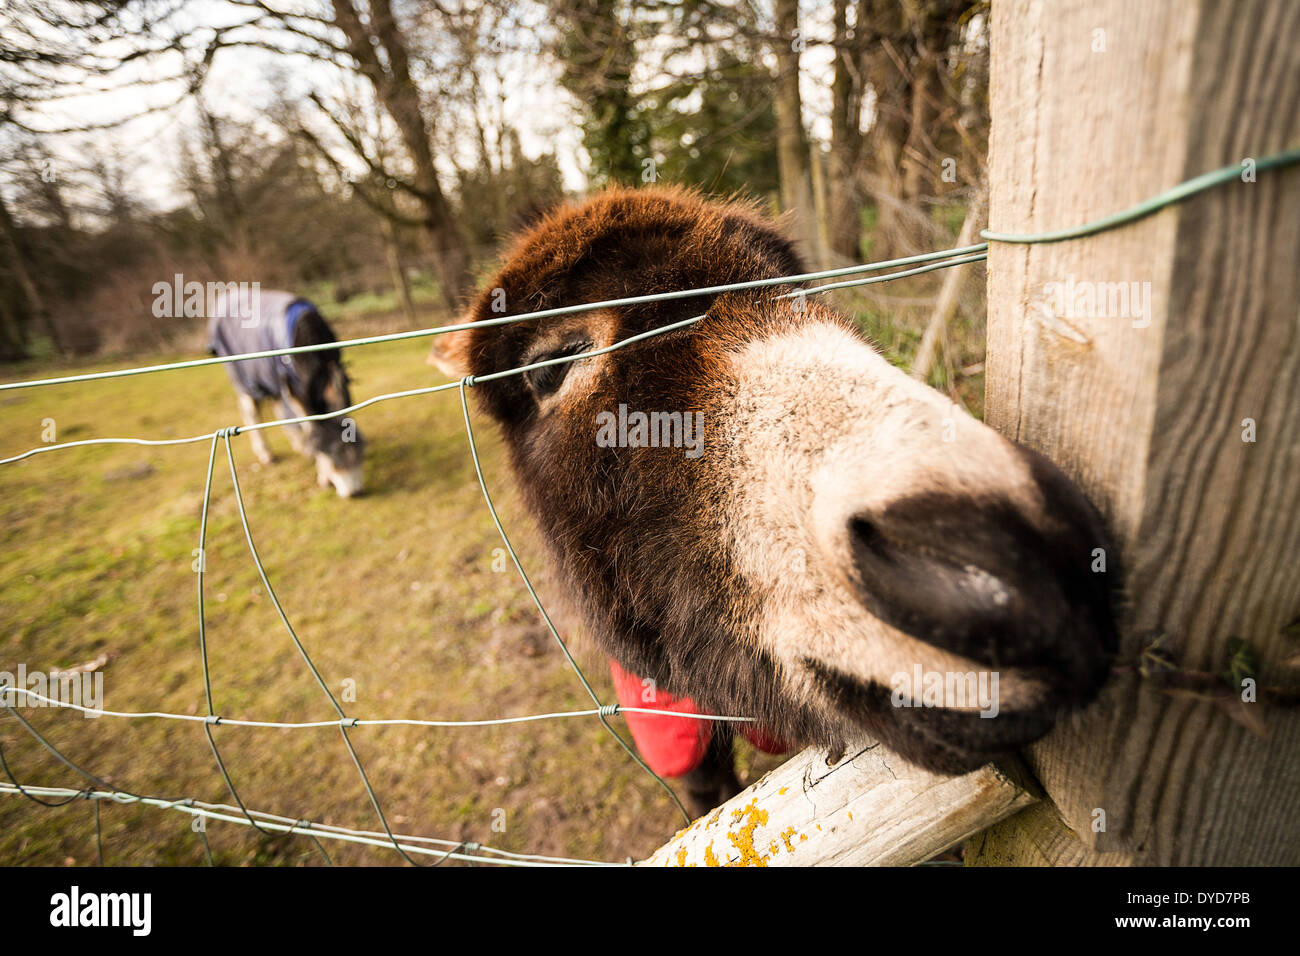 Close up of a donkey in a field Stock Photo